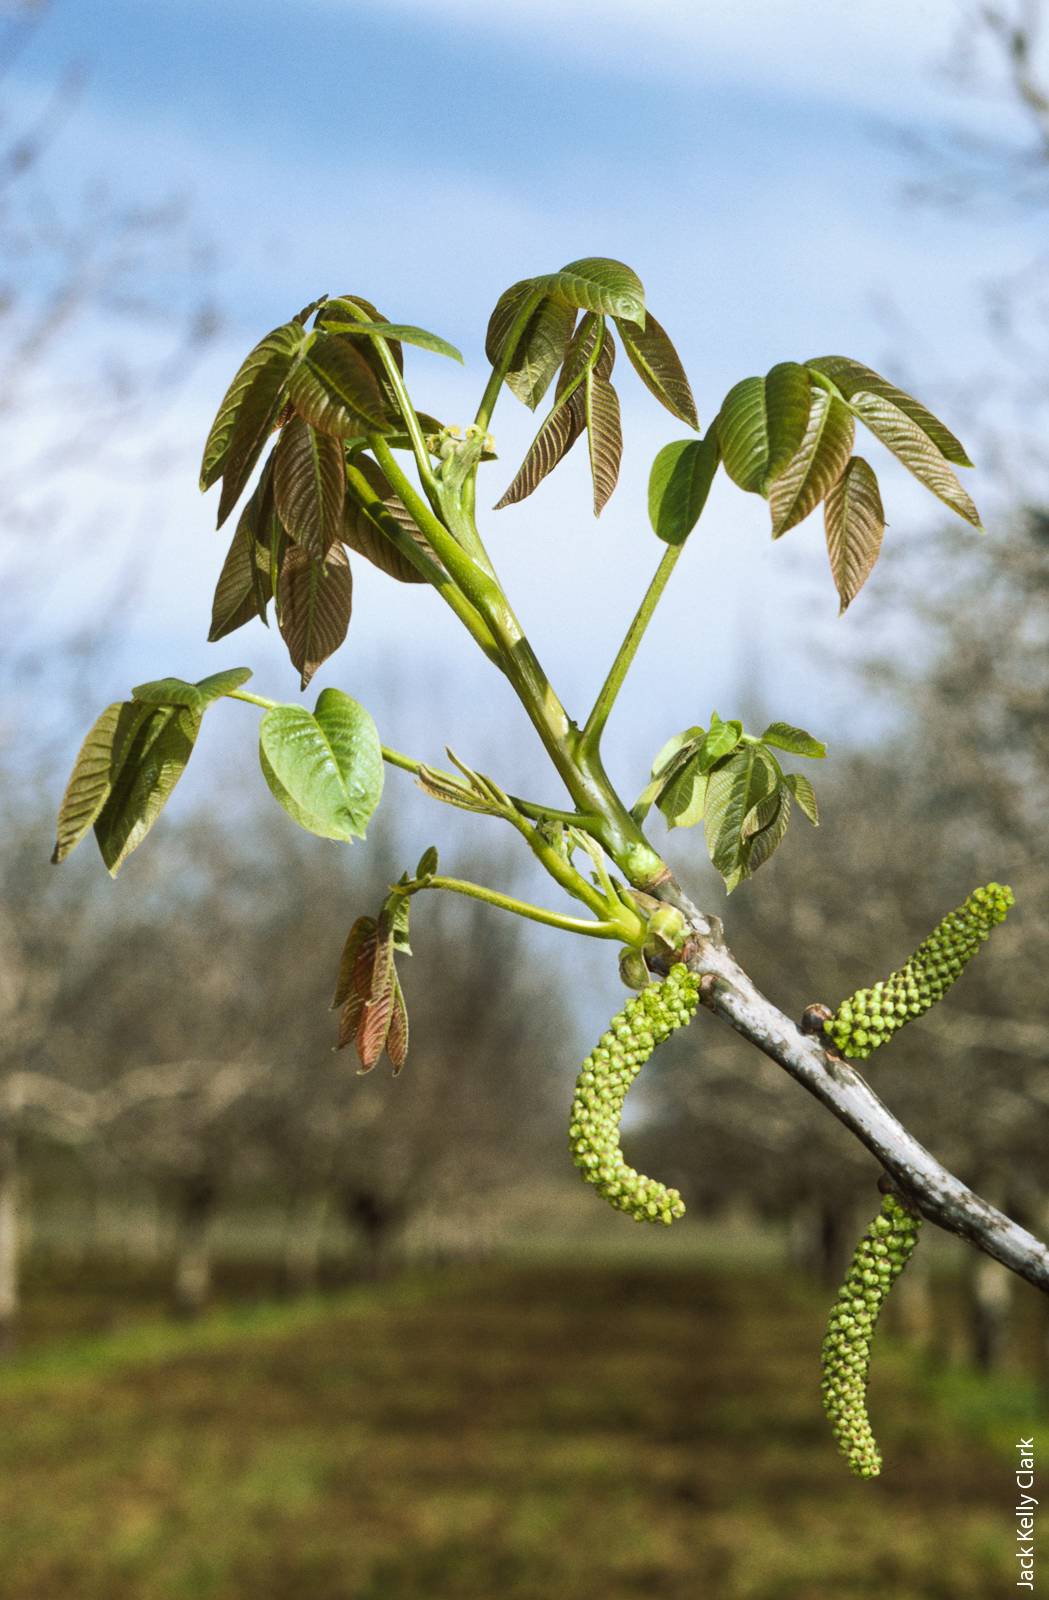 Insufficient chill hours can cause a delay in the opening of leaf and flower buds in crops such as walnuts, which may result in reduced fruit yield.